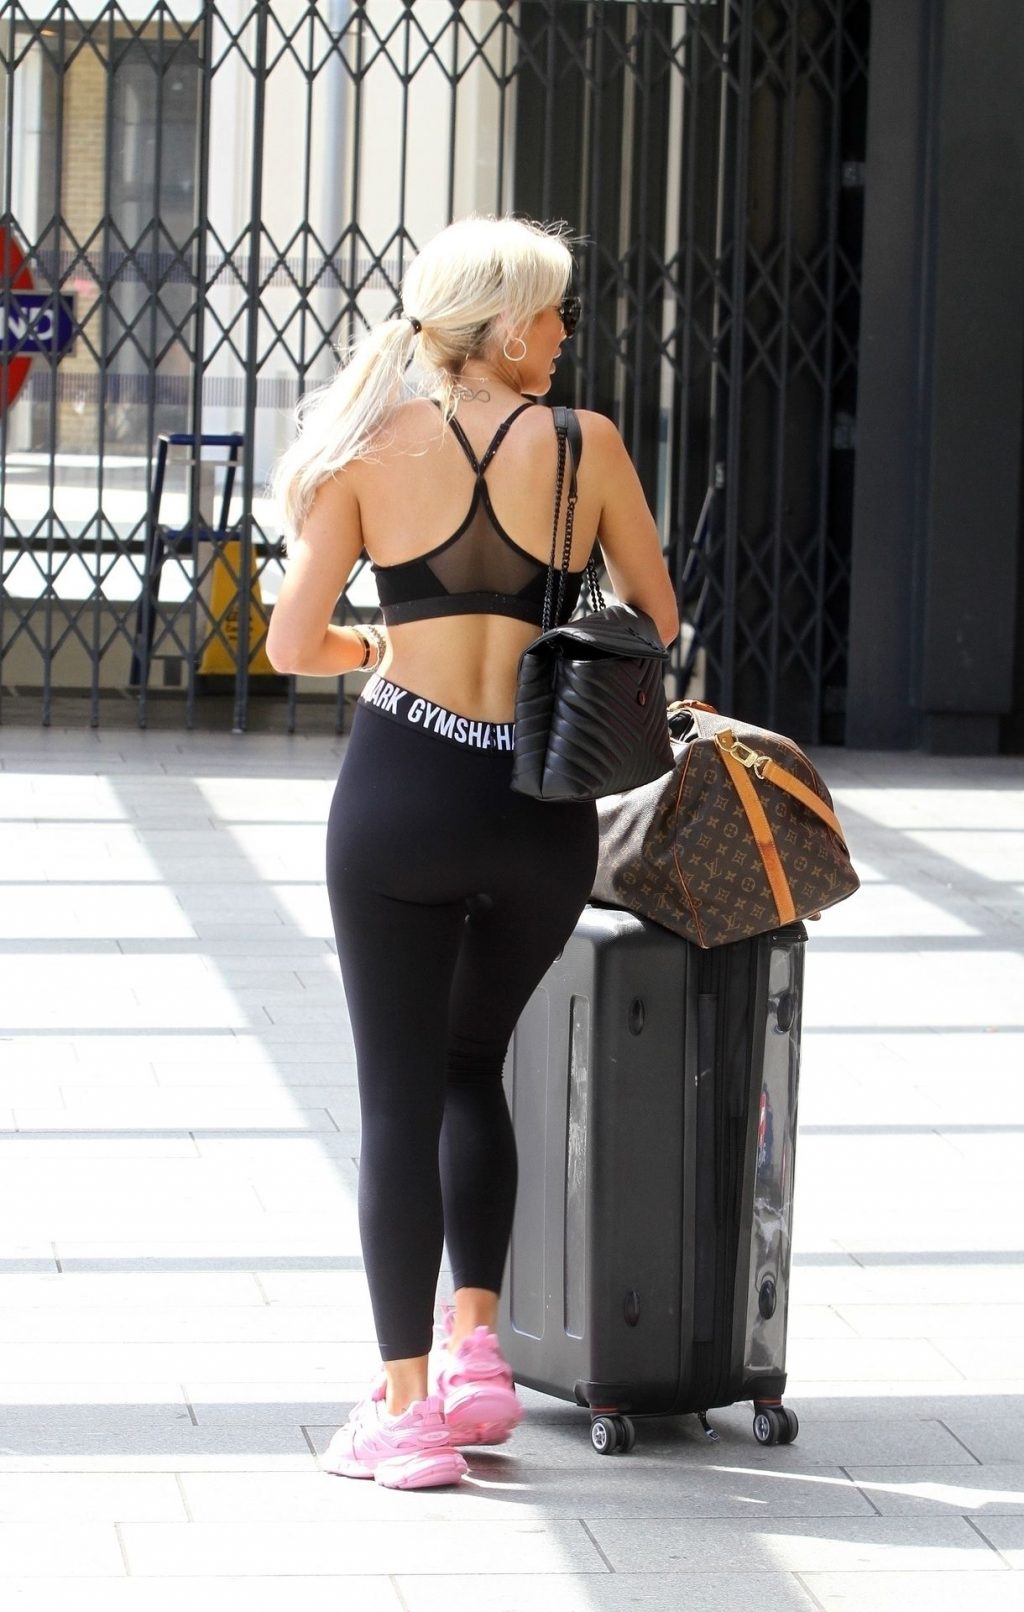 Chloe Ferry Is Seen at Kings Cross Station in London (15 Photos)